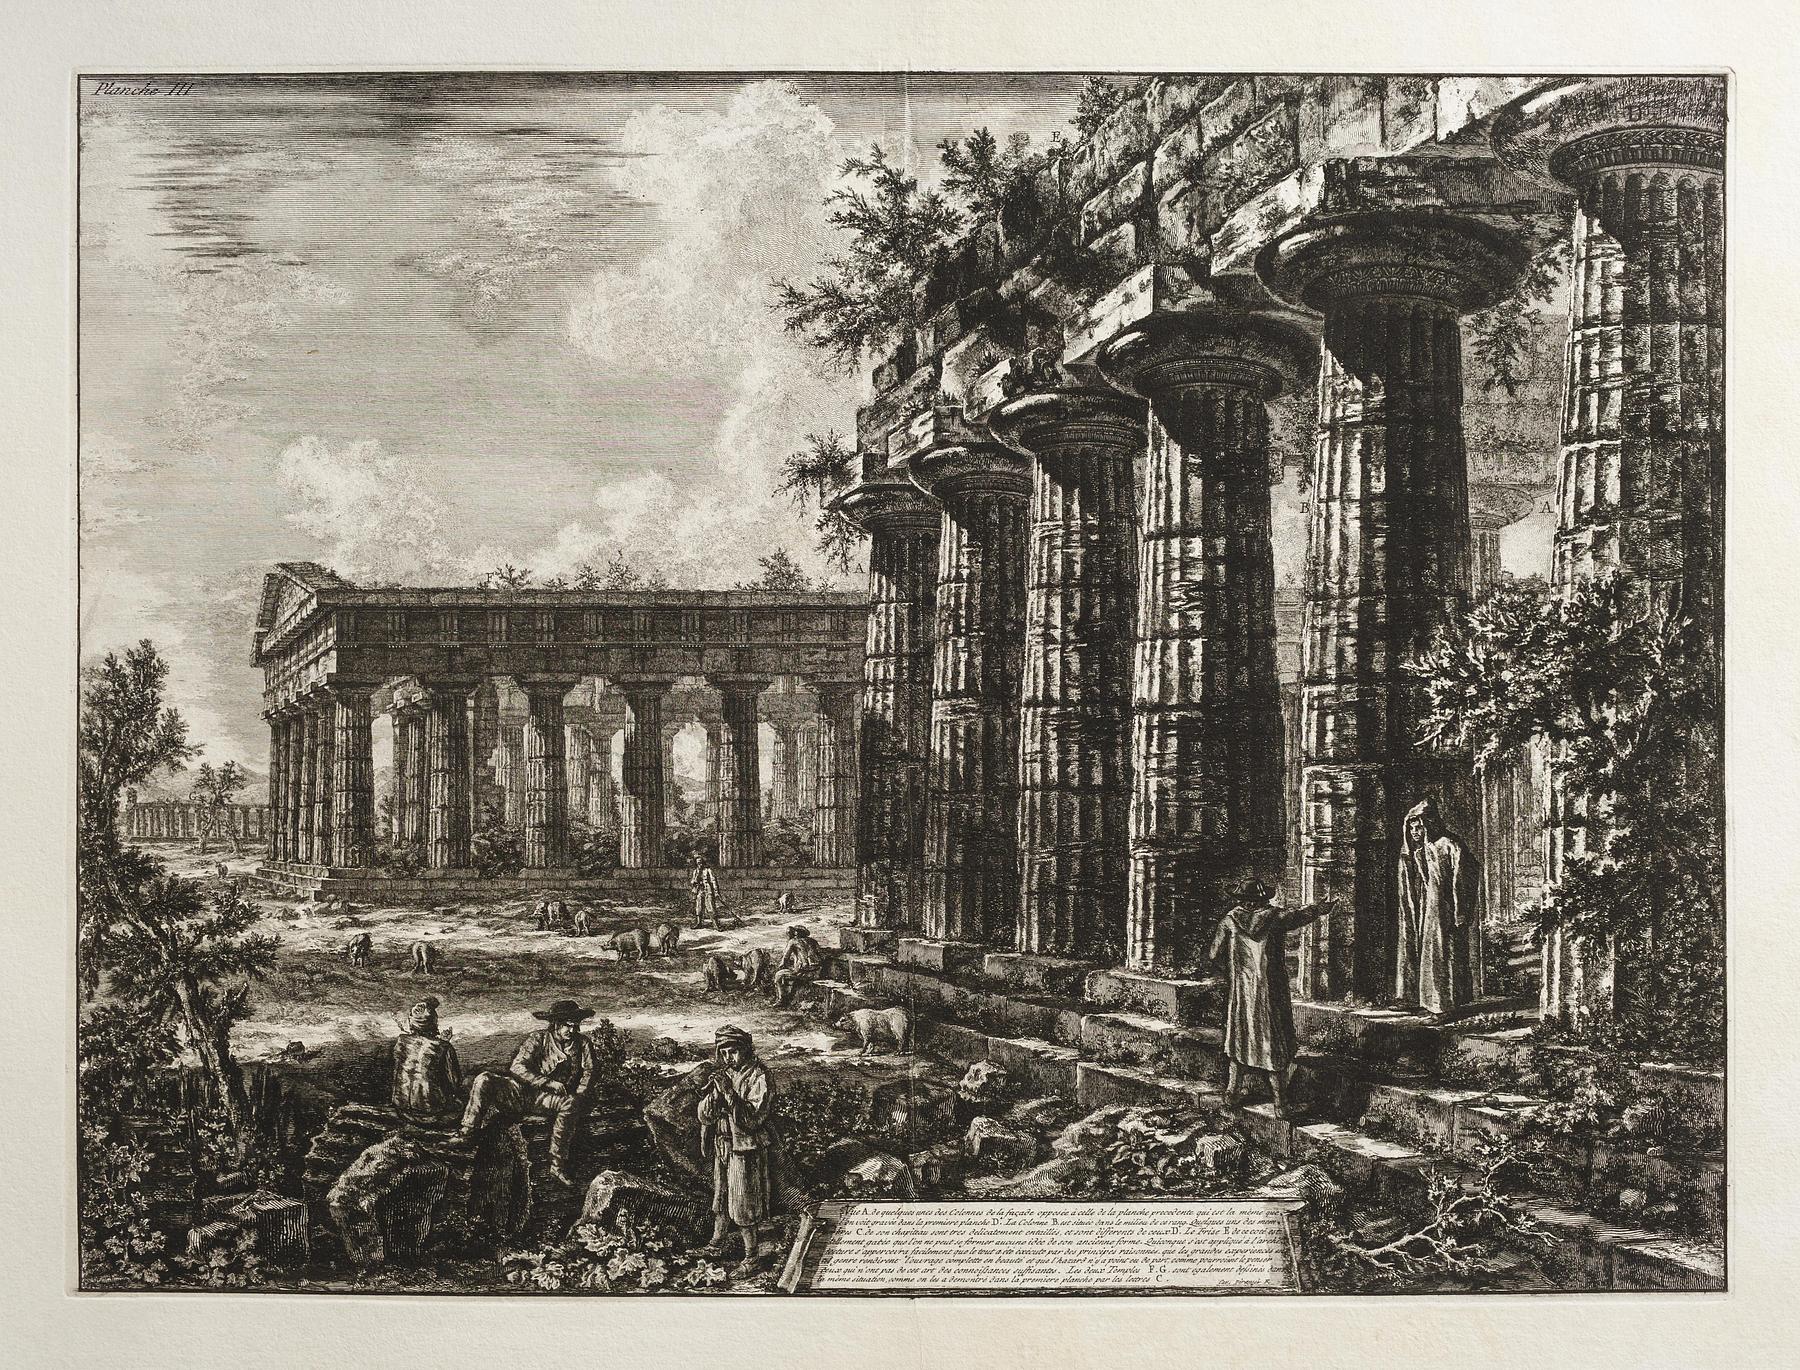 View of some of the Columns of the facade opposite to that of the previous plate, E315,35